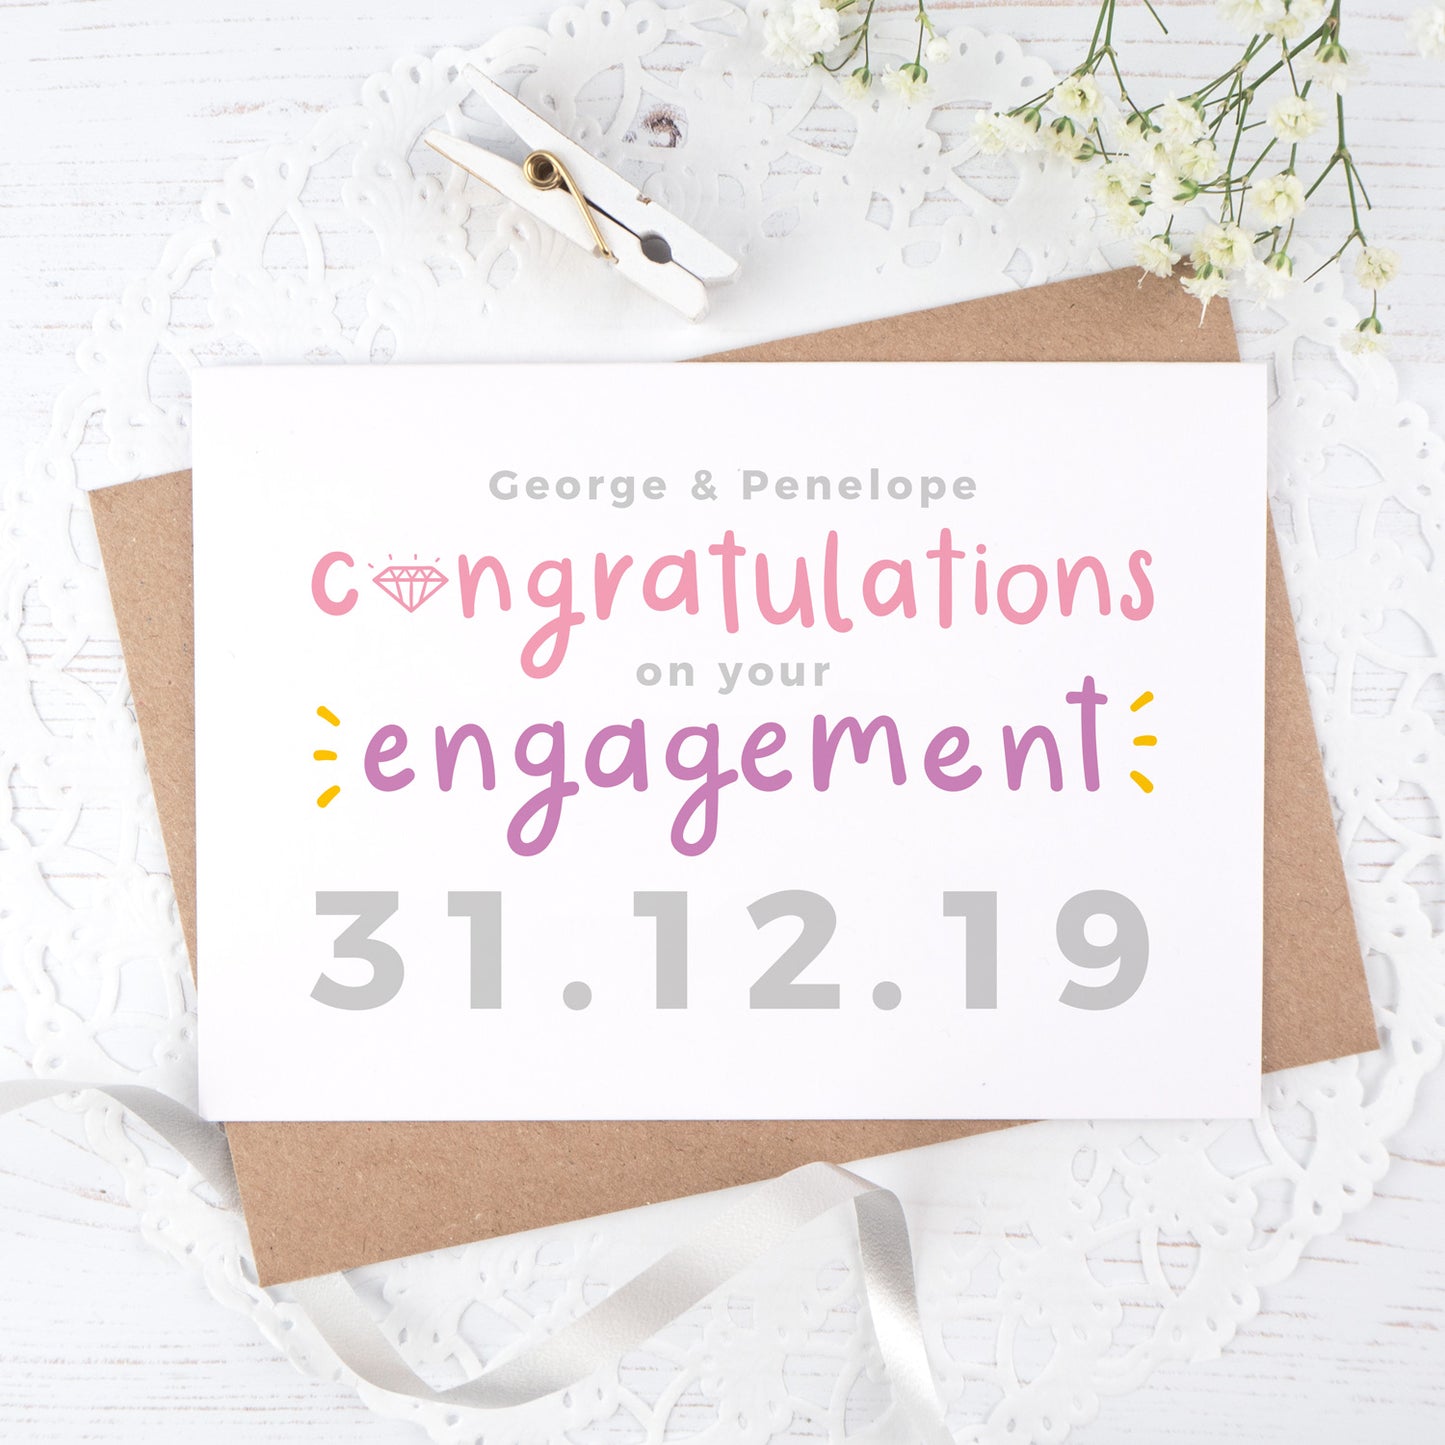 A personalised engagement card with room for the happy couples names and date the question was popped! This card has purple and pink text on a white background with a grey date.